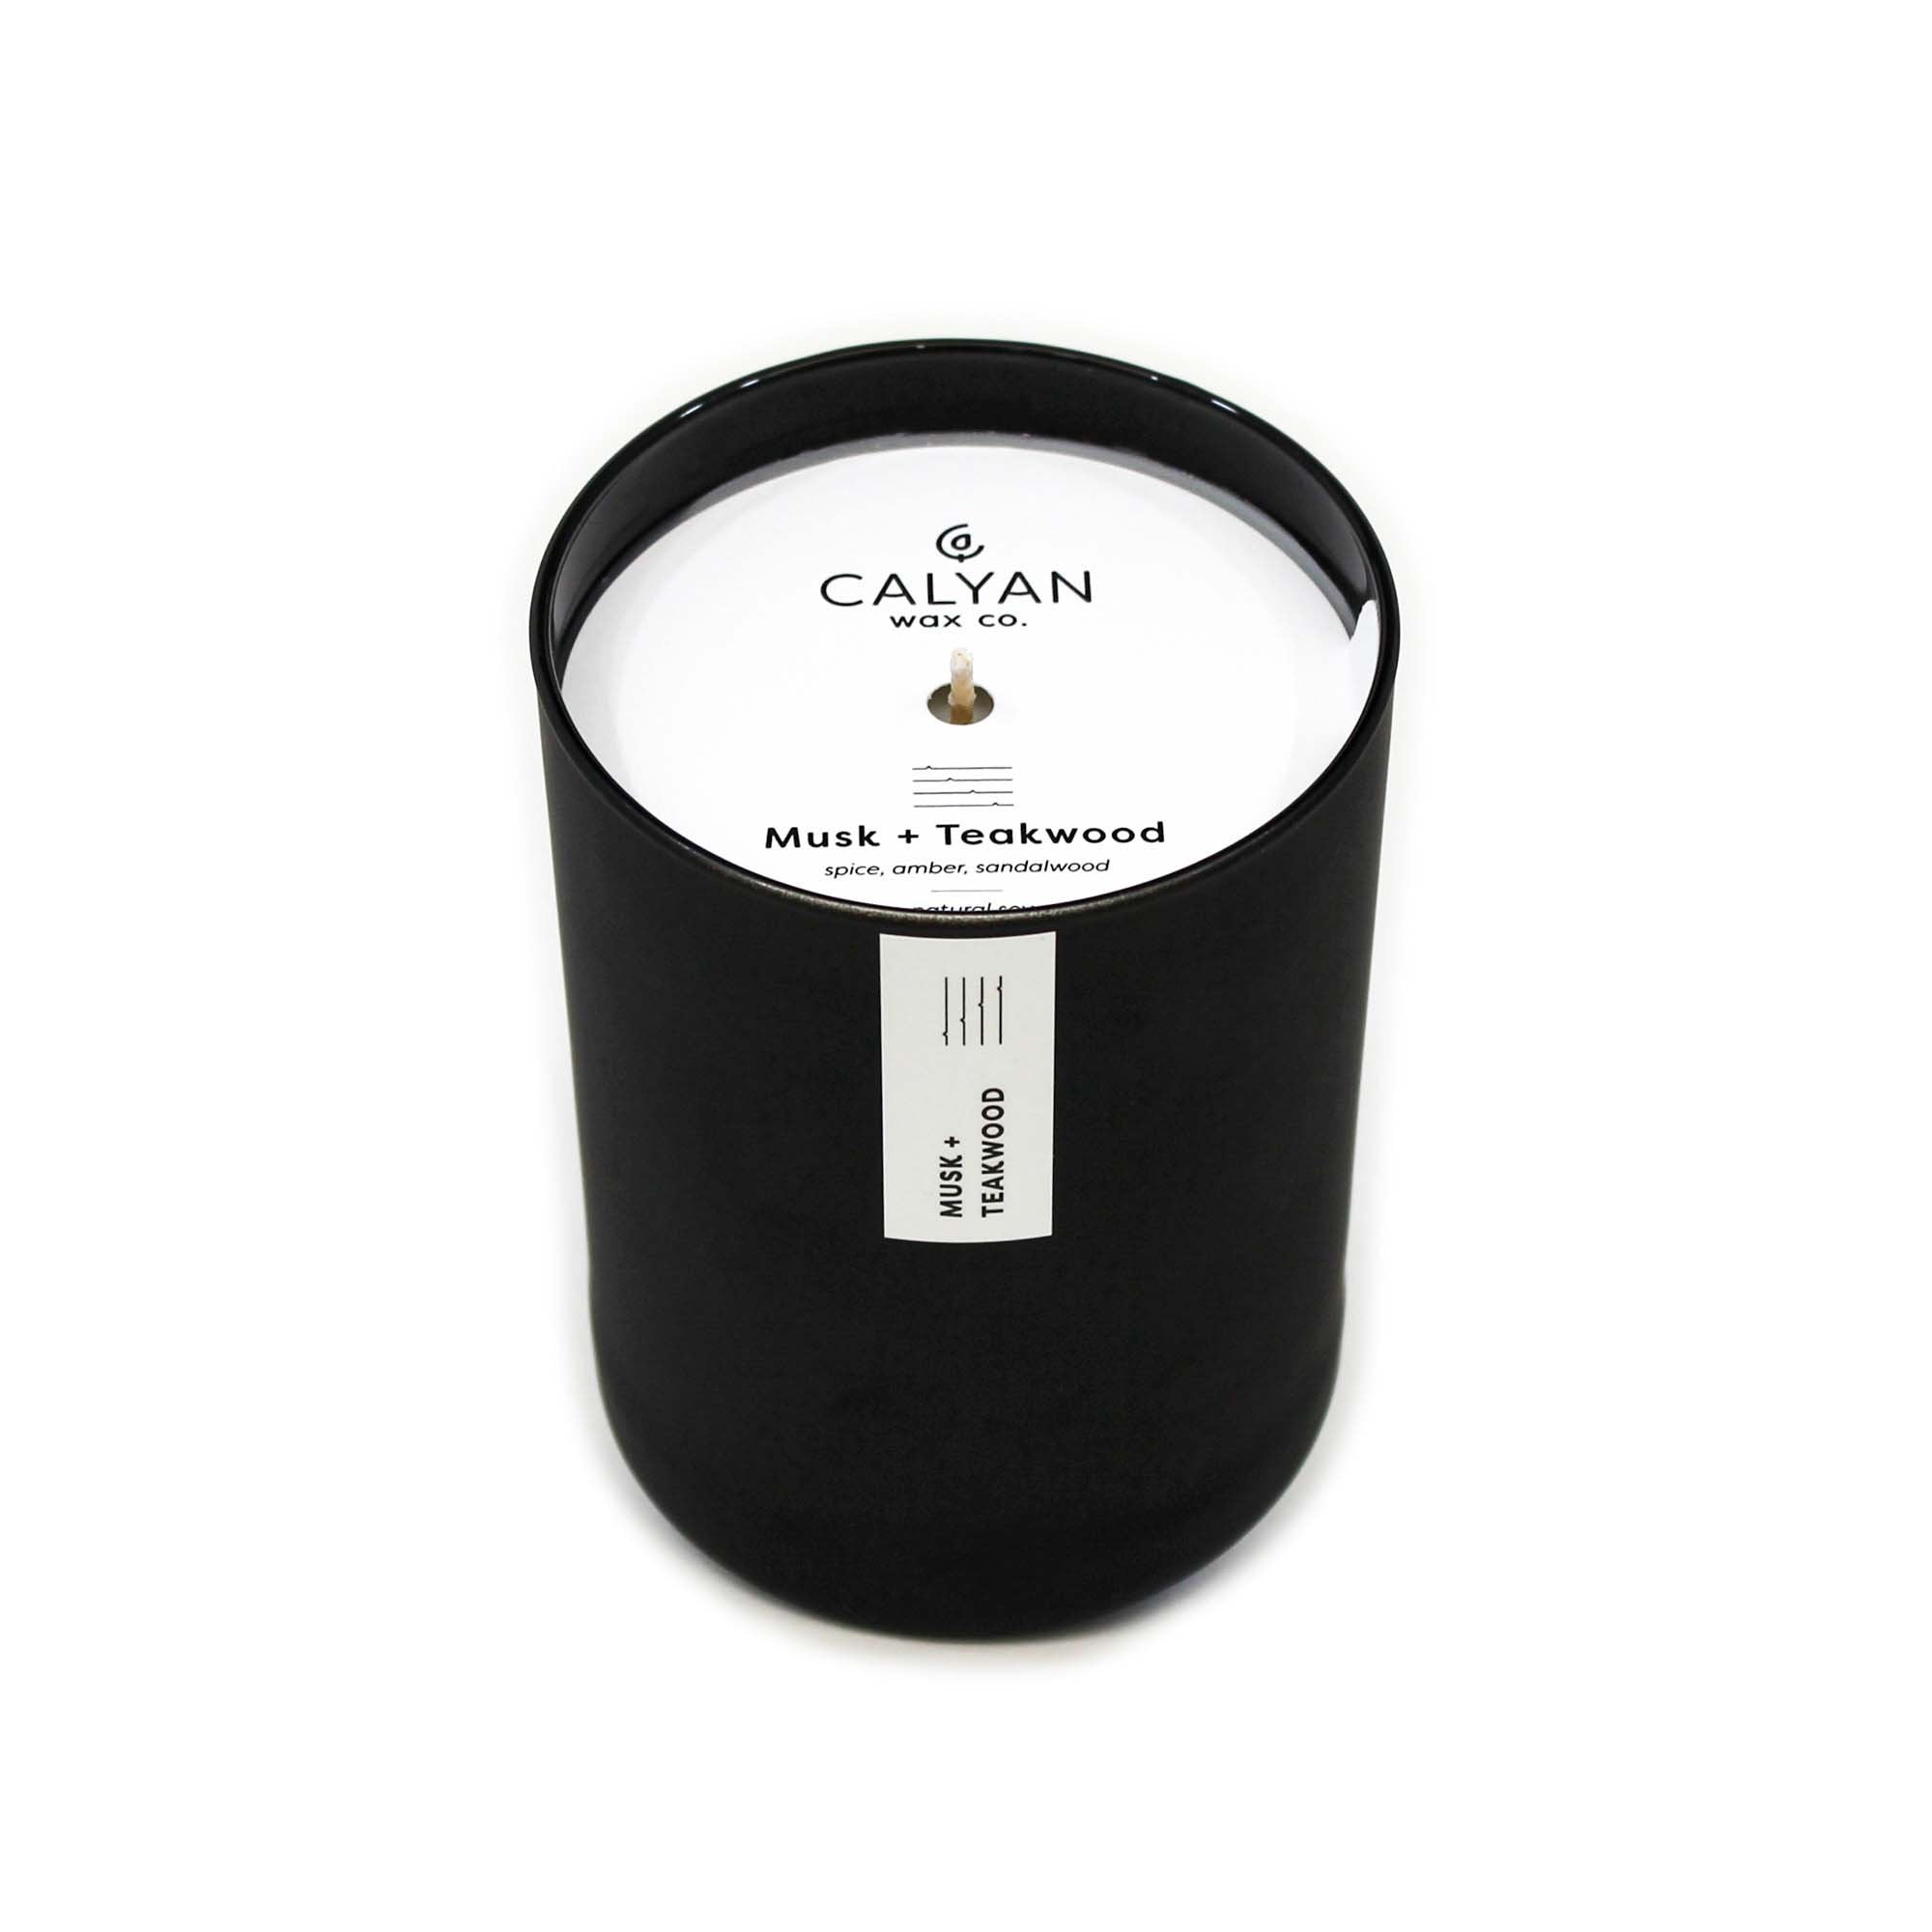 Black matte glass tumbler candle Musk + Teakwood fragrance from Calyan Wax Company